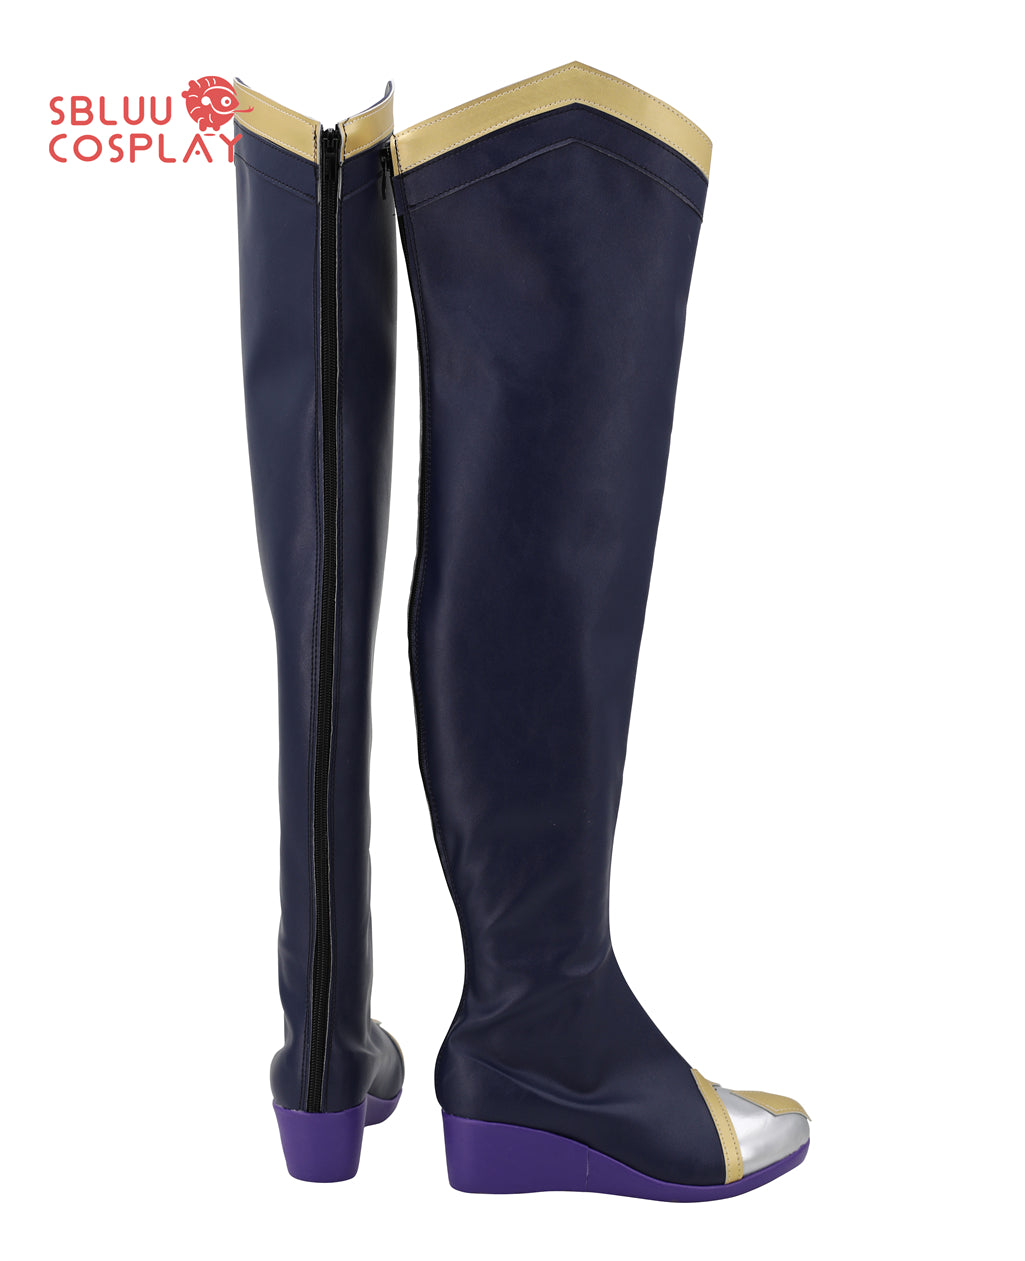 SBluuCosplay LOL DRX Ashe Cosplay Shoes Boots